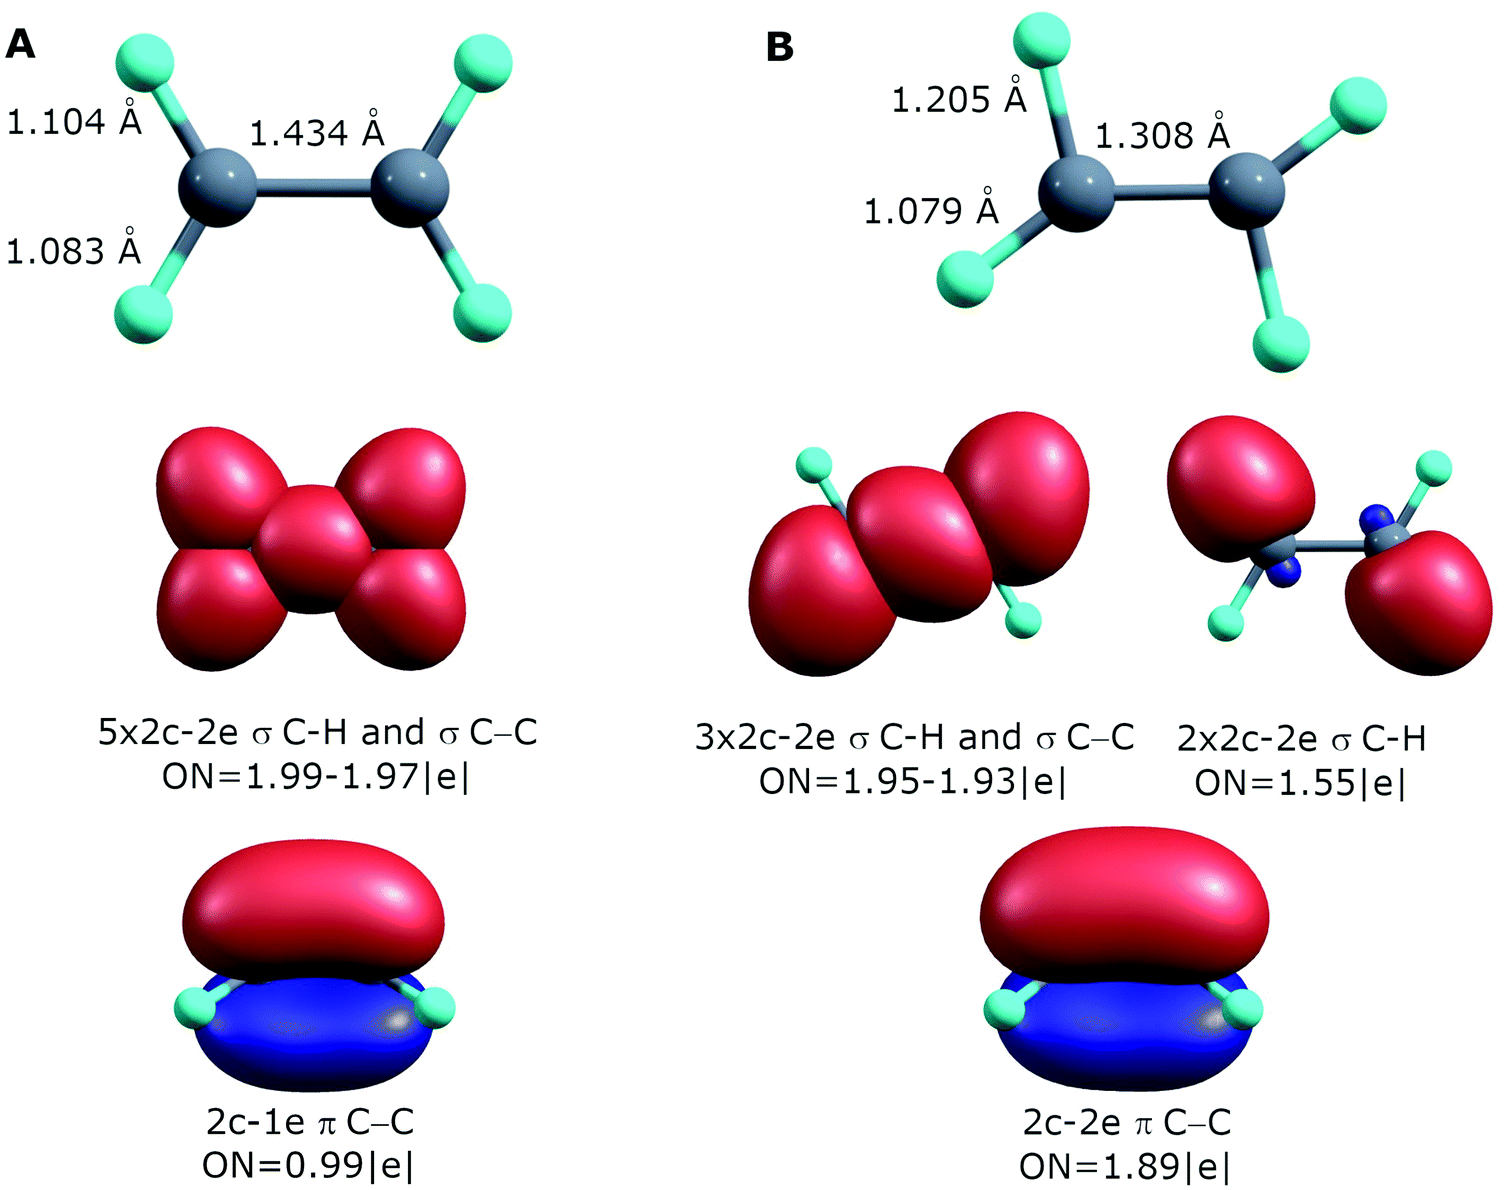 Chemical Bonding Analysis Of Excited States Using The Adaptive Natural Density Partitioning Method Physical Chemistry Chemical Physics Rsc Publishing Doi 10 1039 C9cpg